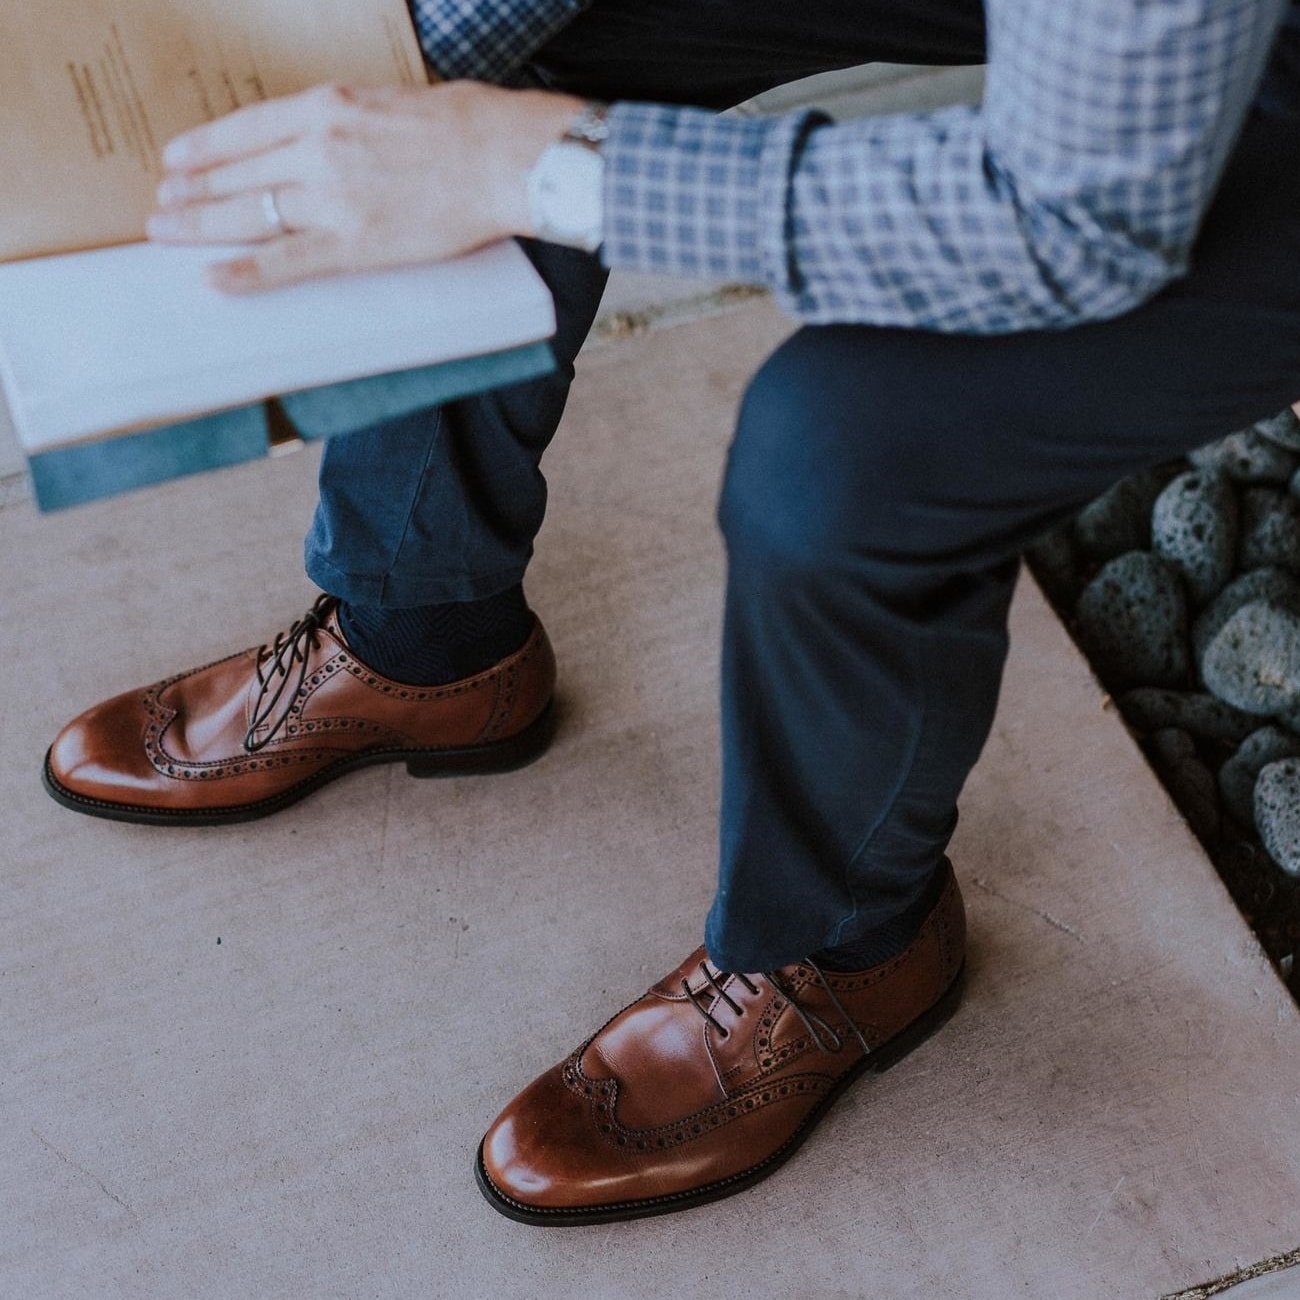 Business Casual Shoes Guide | vlr.eng.br